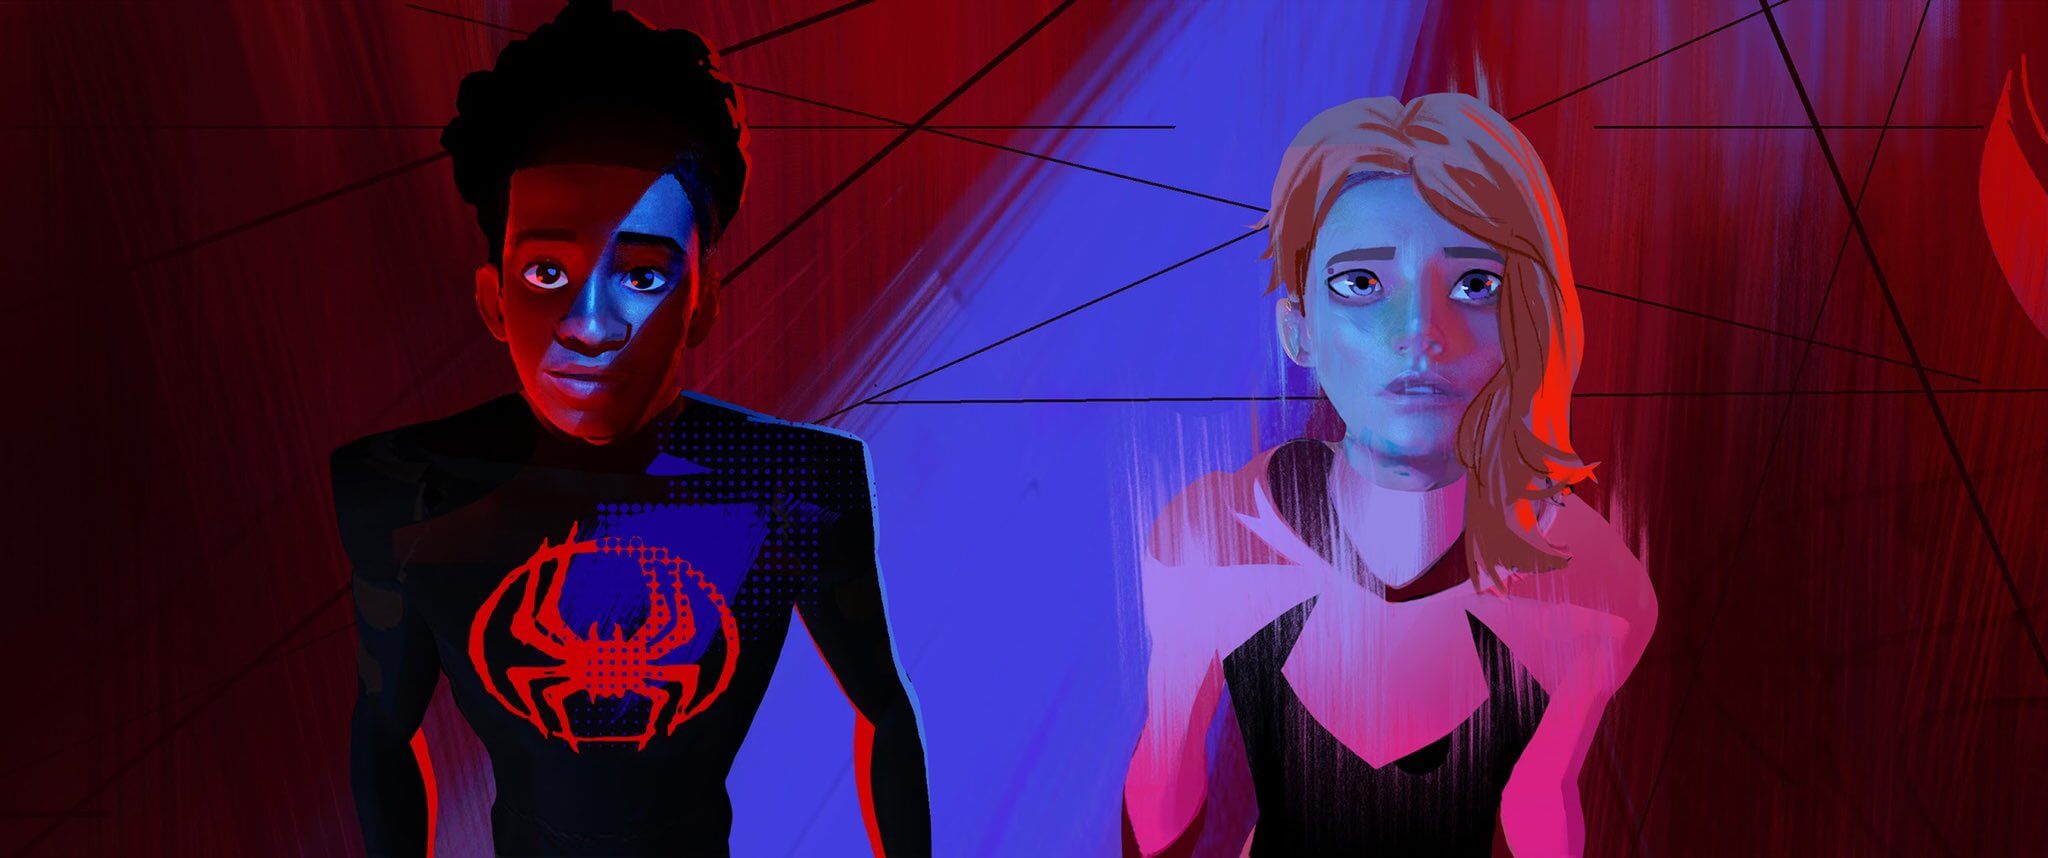 Concept art of Miles and Gwen looking up at Miguel, with dramatic blue lighting and red shadows.